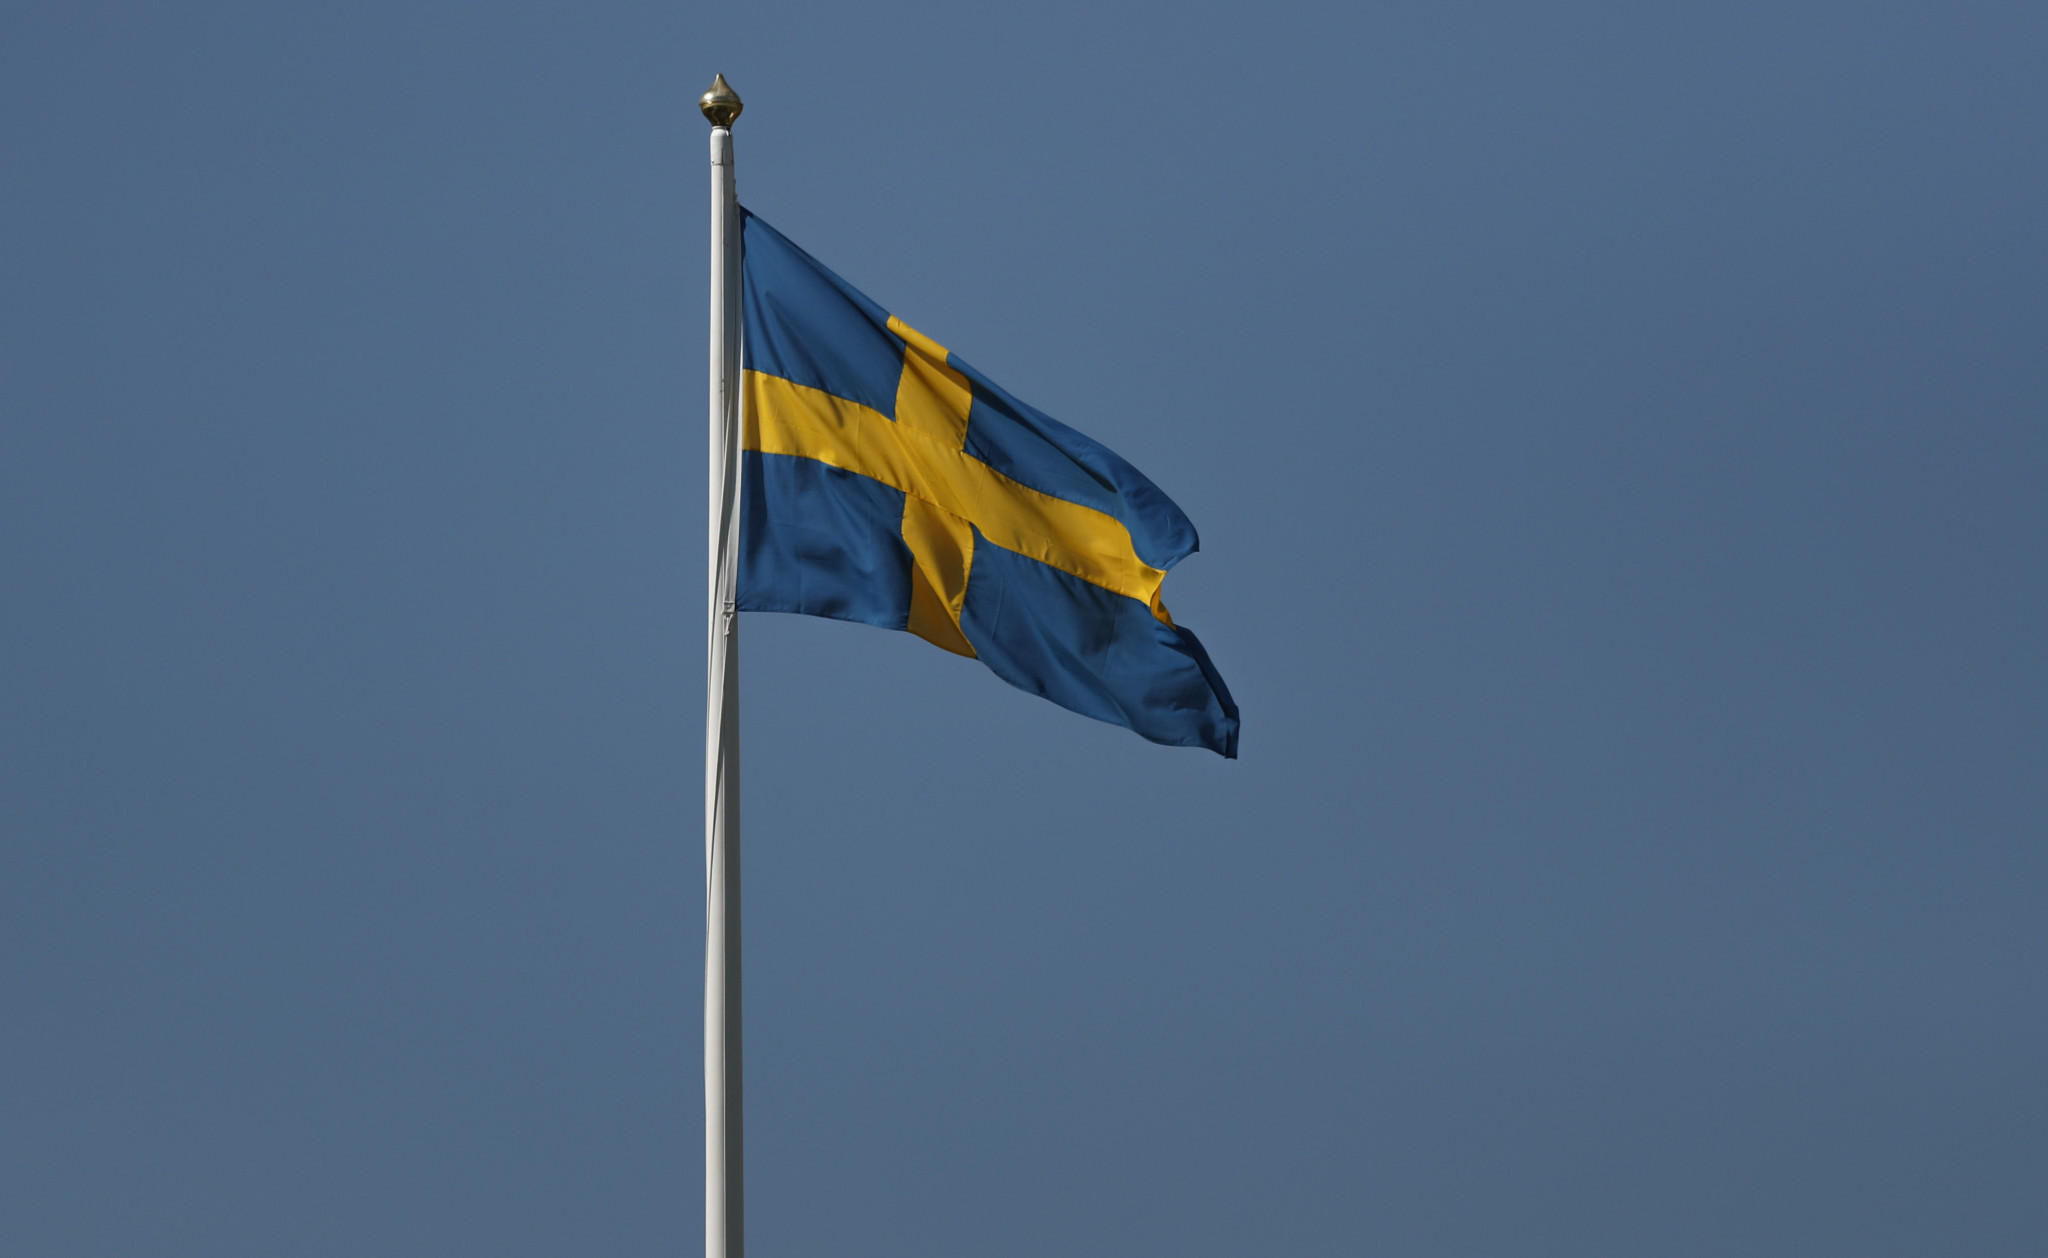 Swedish Sports Confederation reveals mass drop in indoor sport participation due to COVID-19